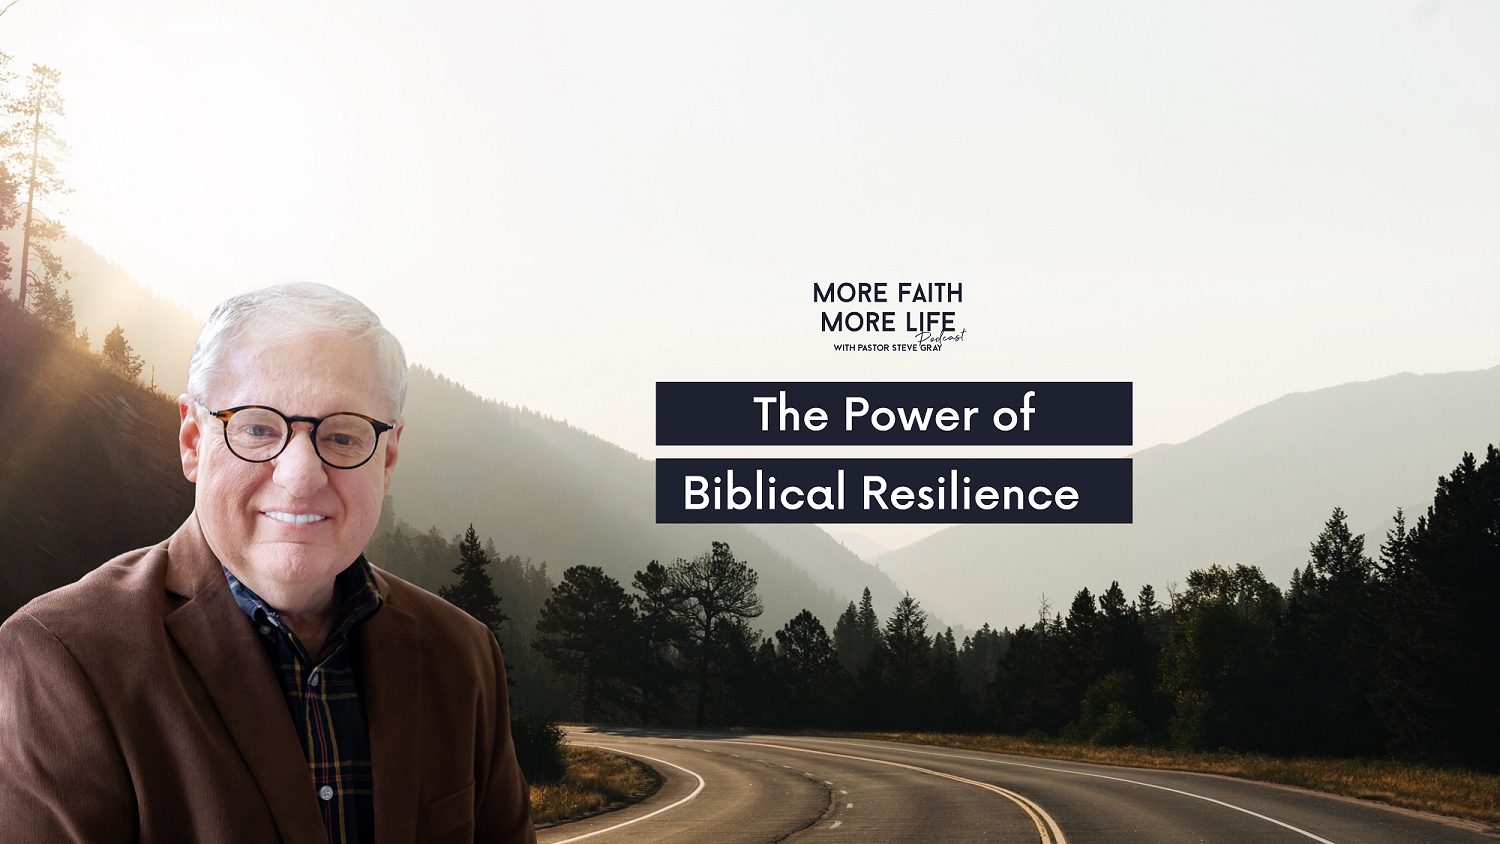 The Power of Biblical Resilience